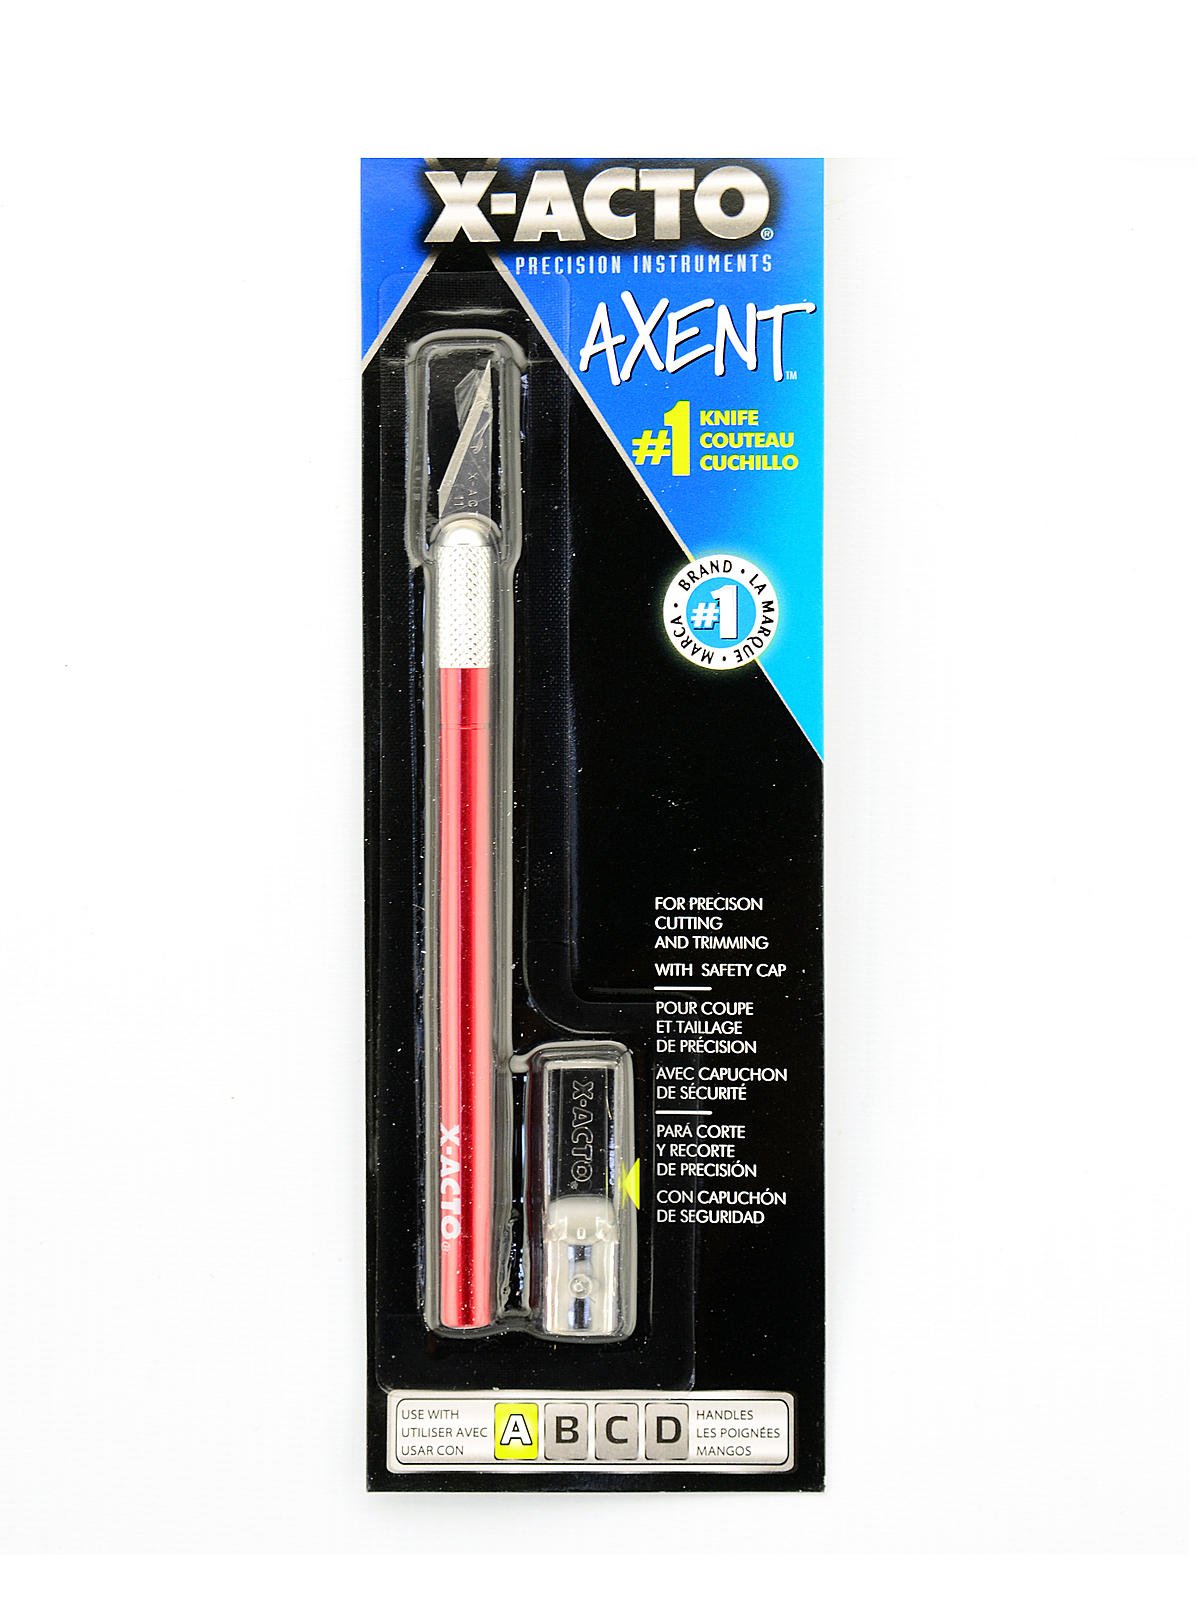 X-Acto - Axent Hobby Knives